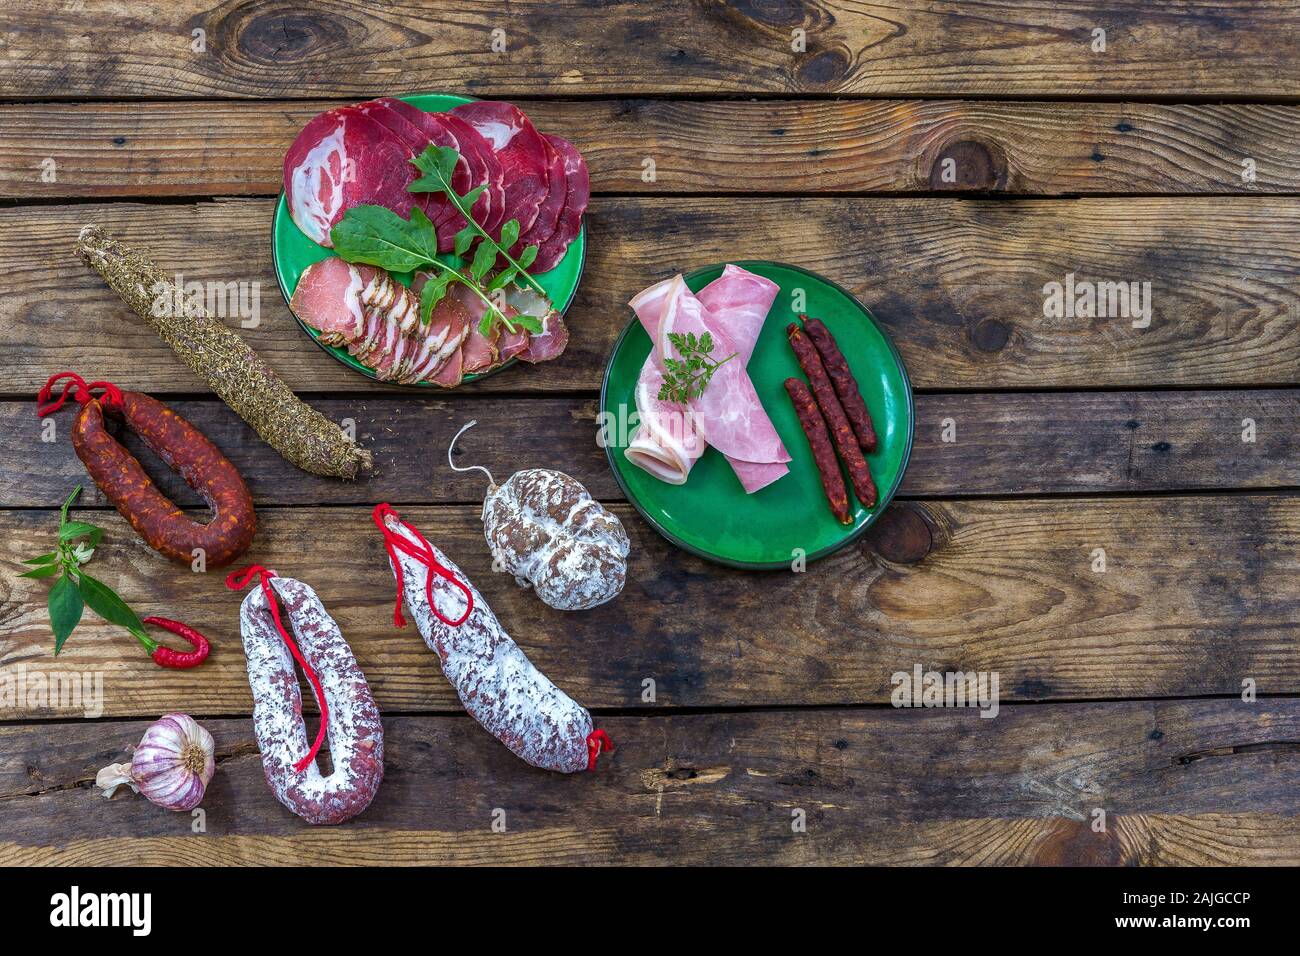 Selection of french raw charcuterie in green plates, with arugula leaves and dry sausage over a wooden background Stock Photo